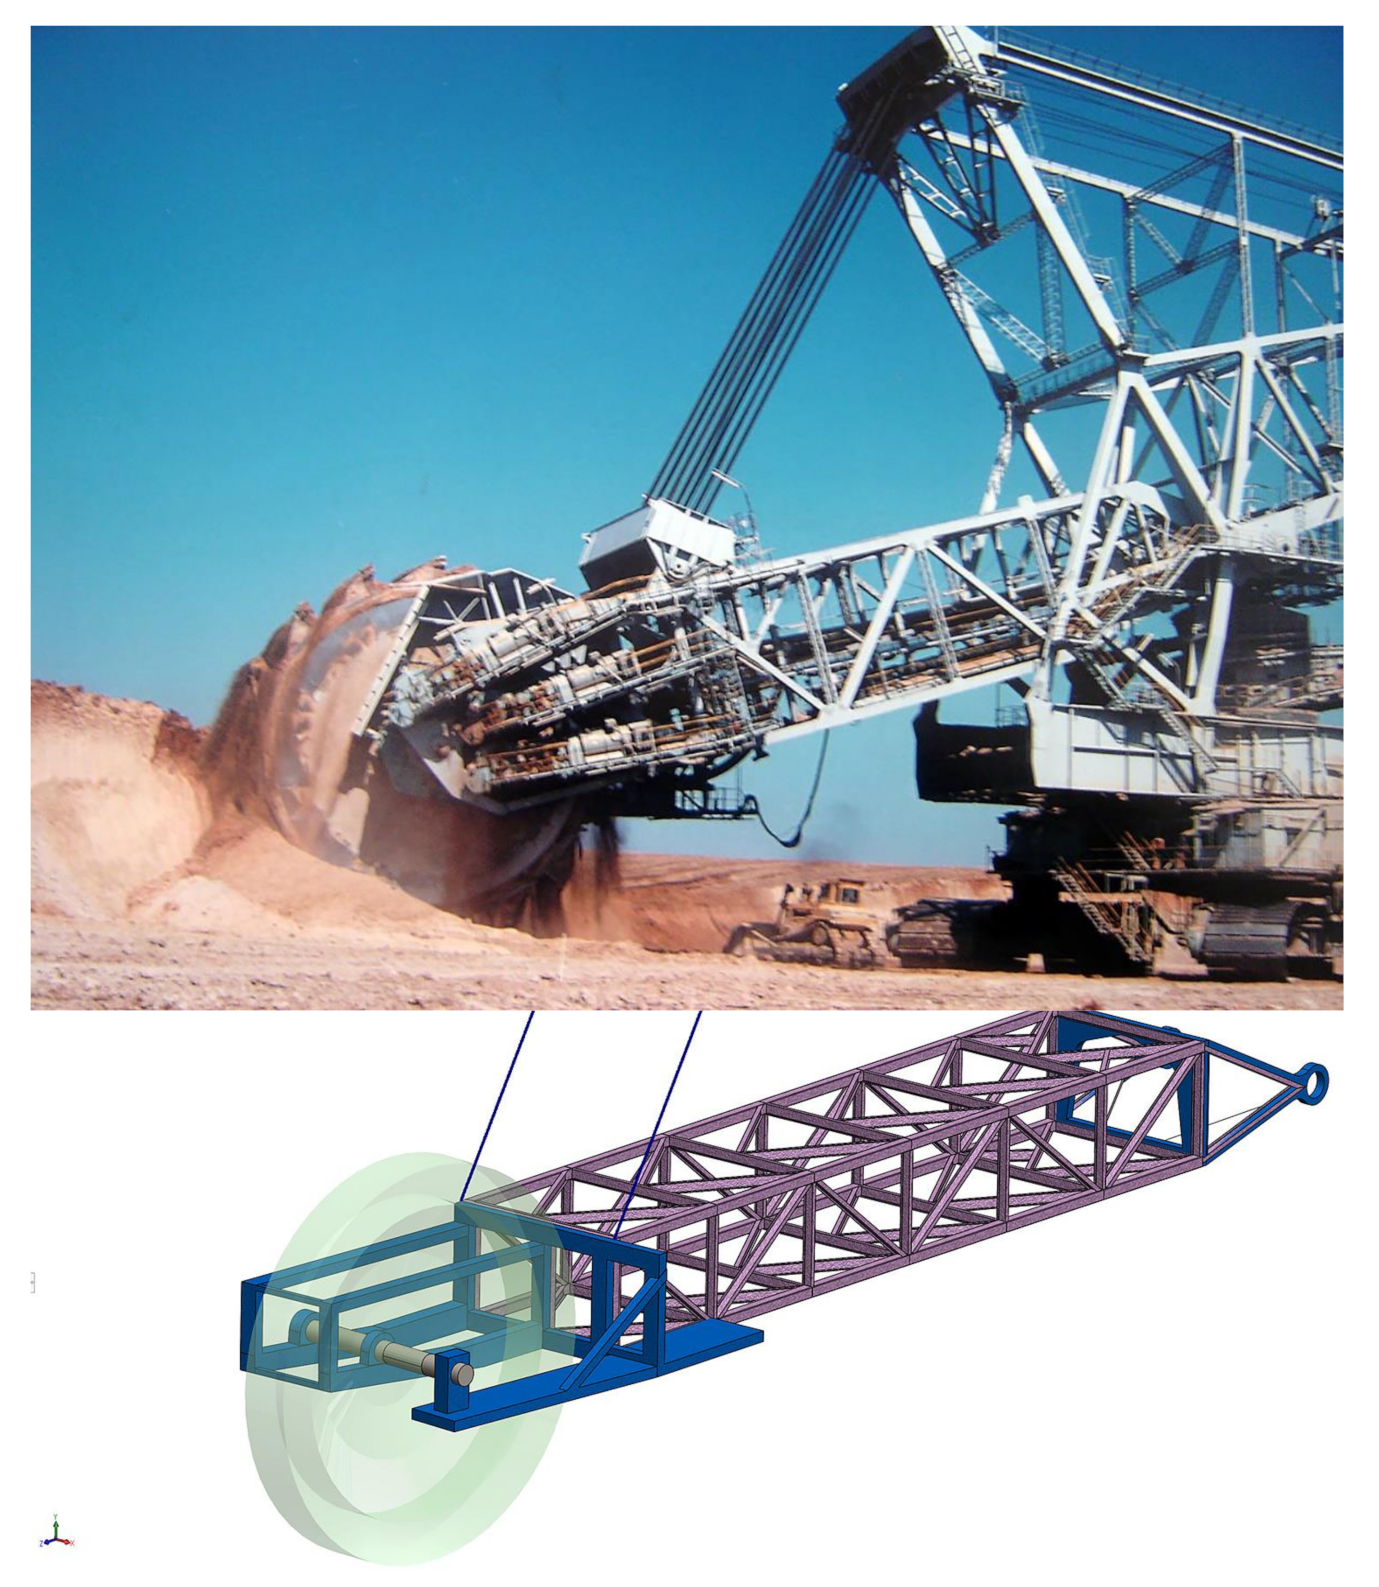 Materials | Free Full-Text | Prediction of Material Failure Time for a  Bucket Wheel Excavator Boom Using Computer Simulation